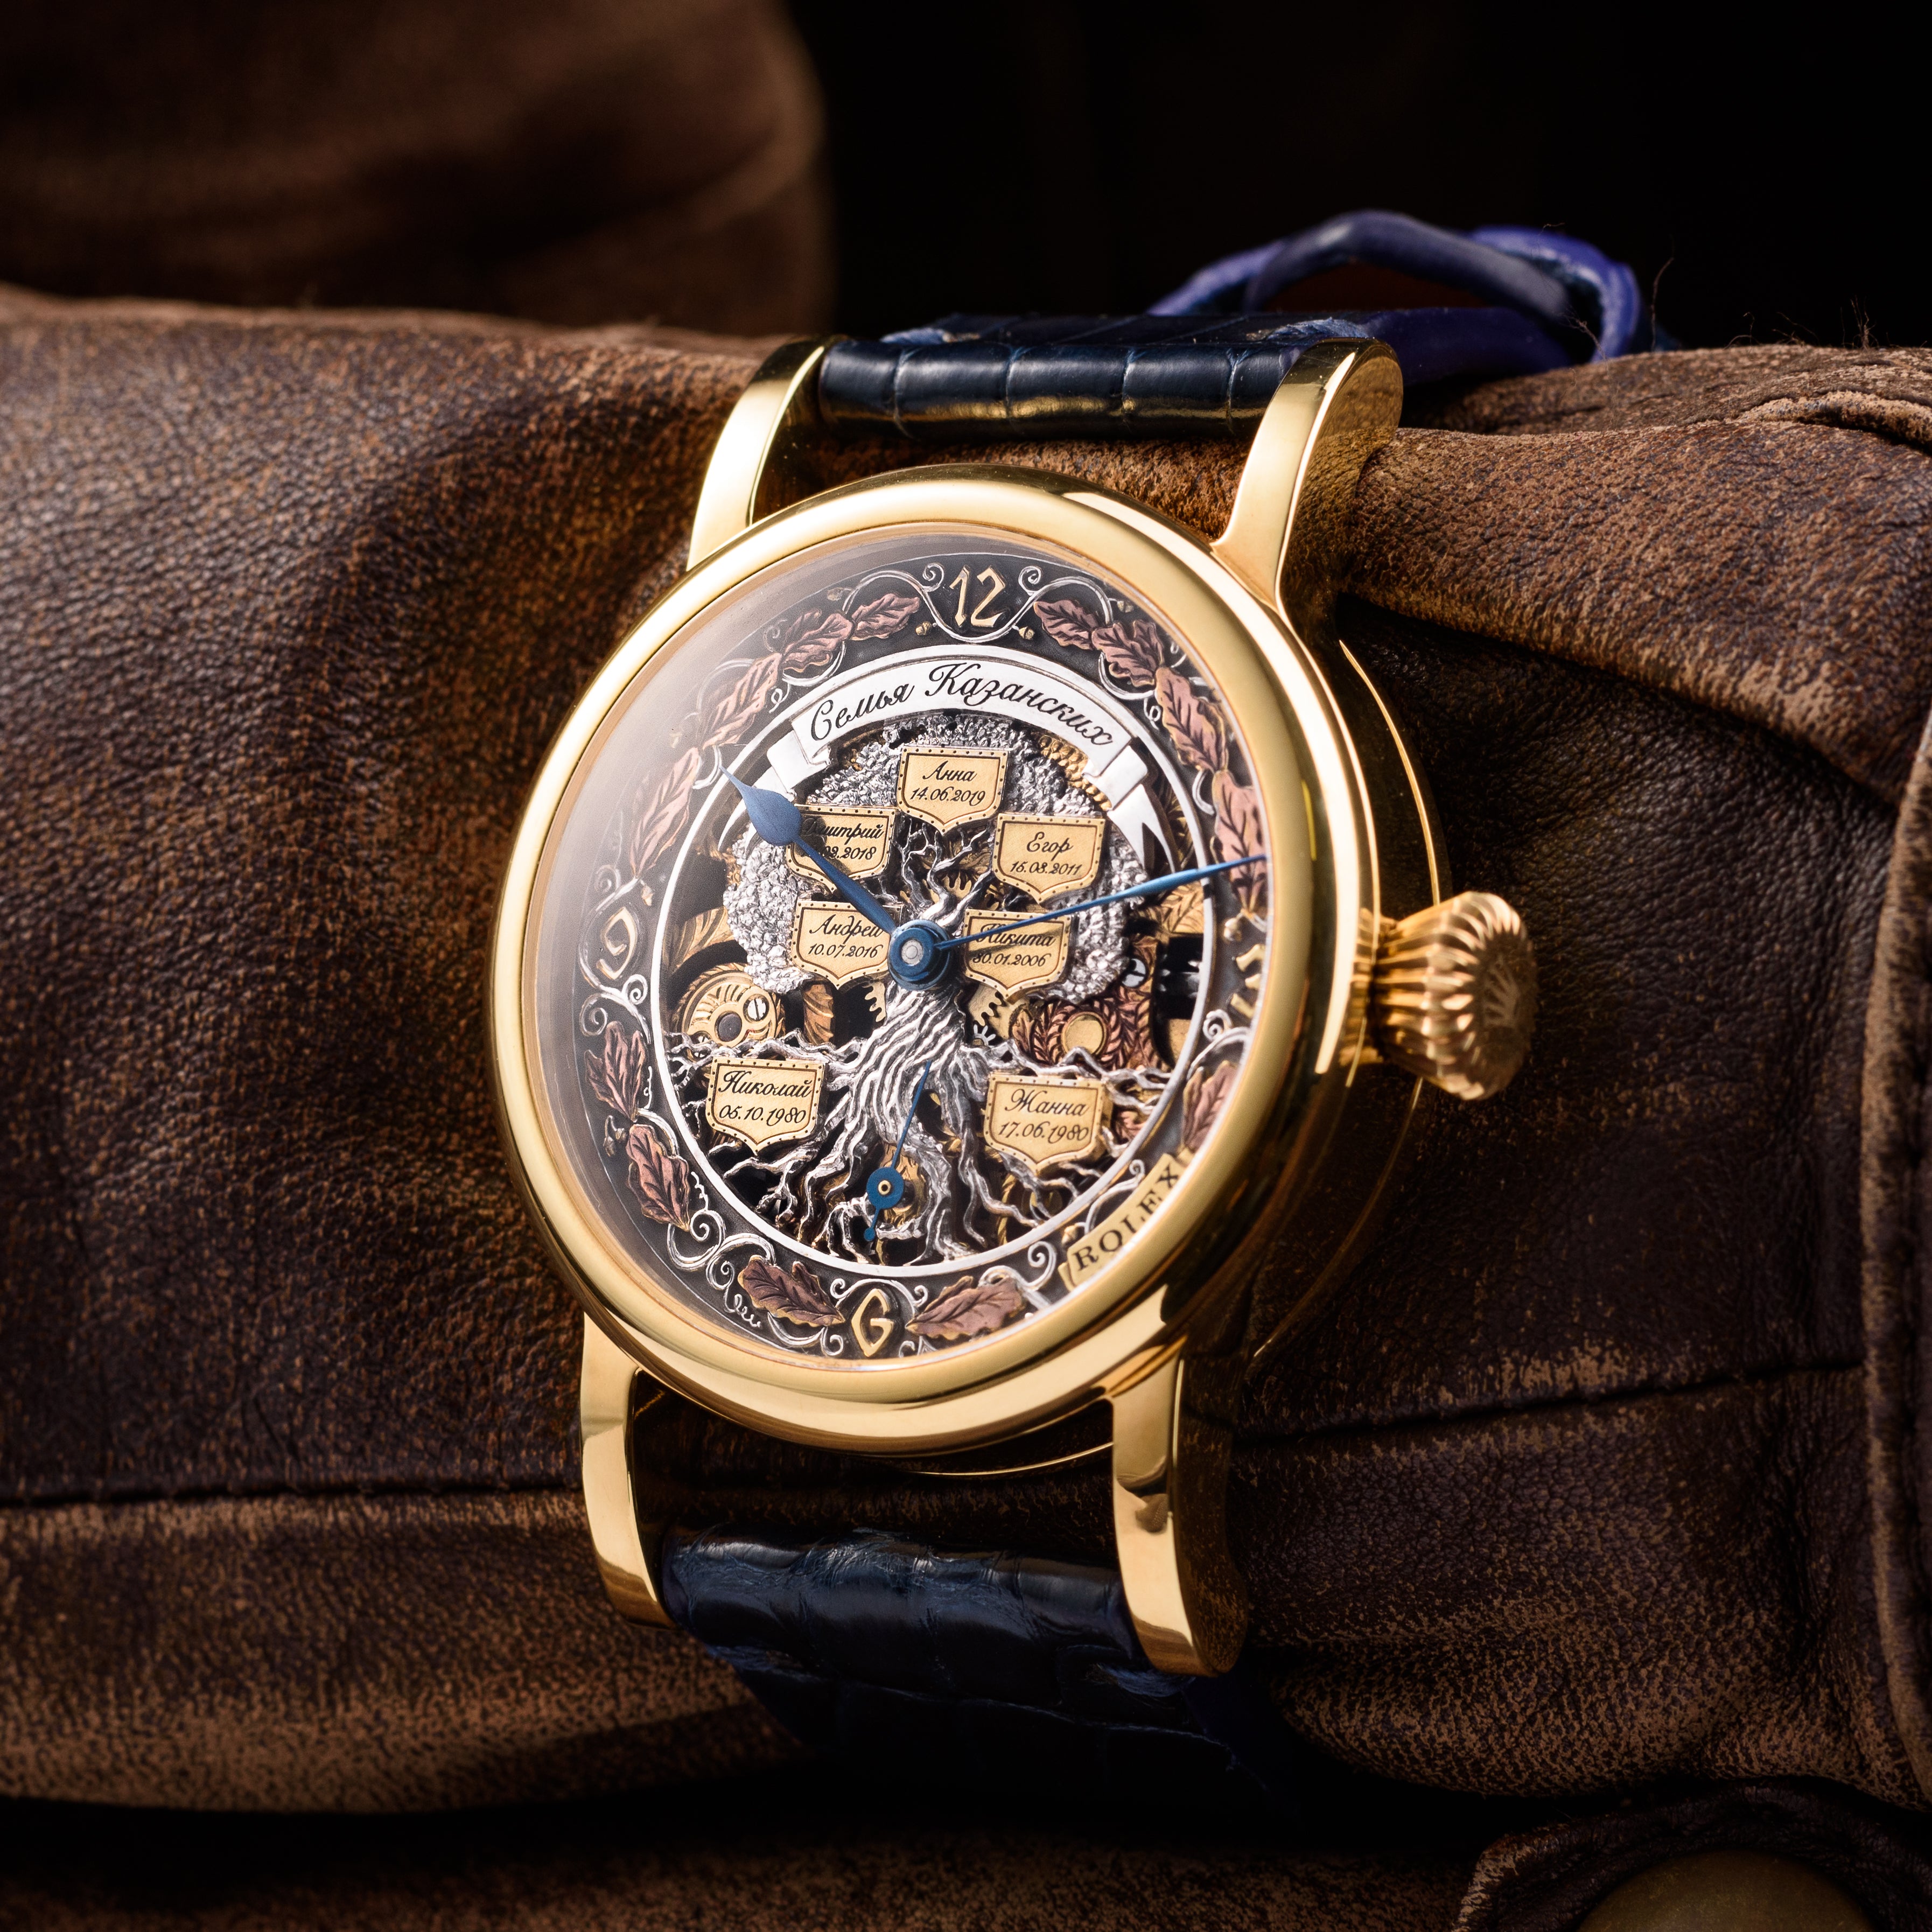 Rolex - Family tree, 585 Gold or brass(gold plated) case, movement of 1920s, exclusive custom skeleton